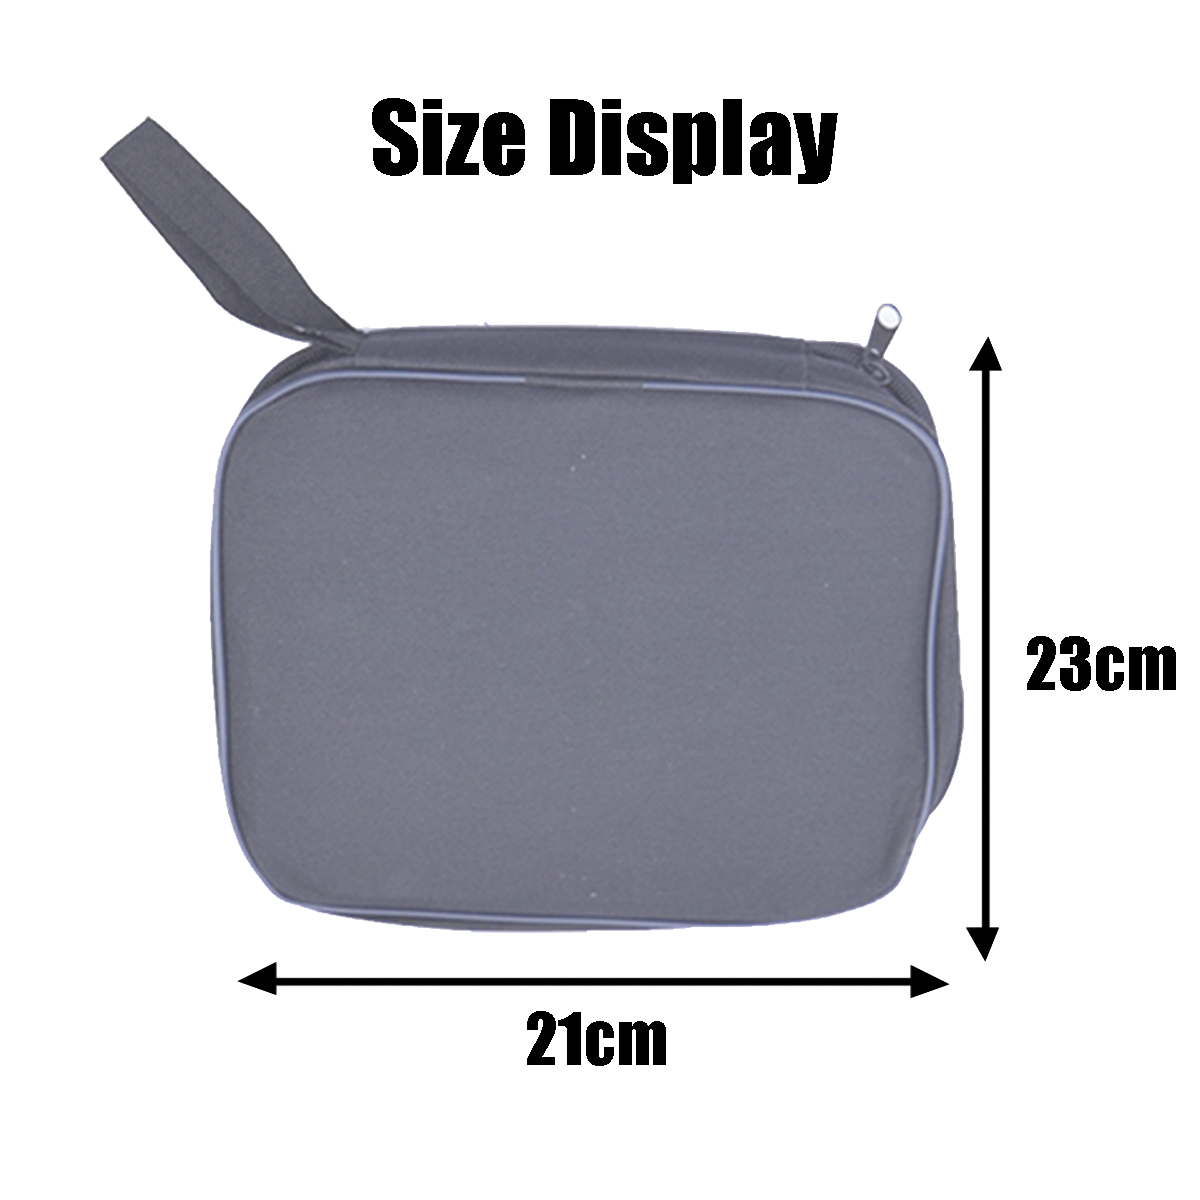 Portable-Tool-Bag-Pouch-Organize-Canvas-Storage-Bag-Small-Parts-Hand-Tool-Plumber-1557725-7